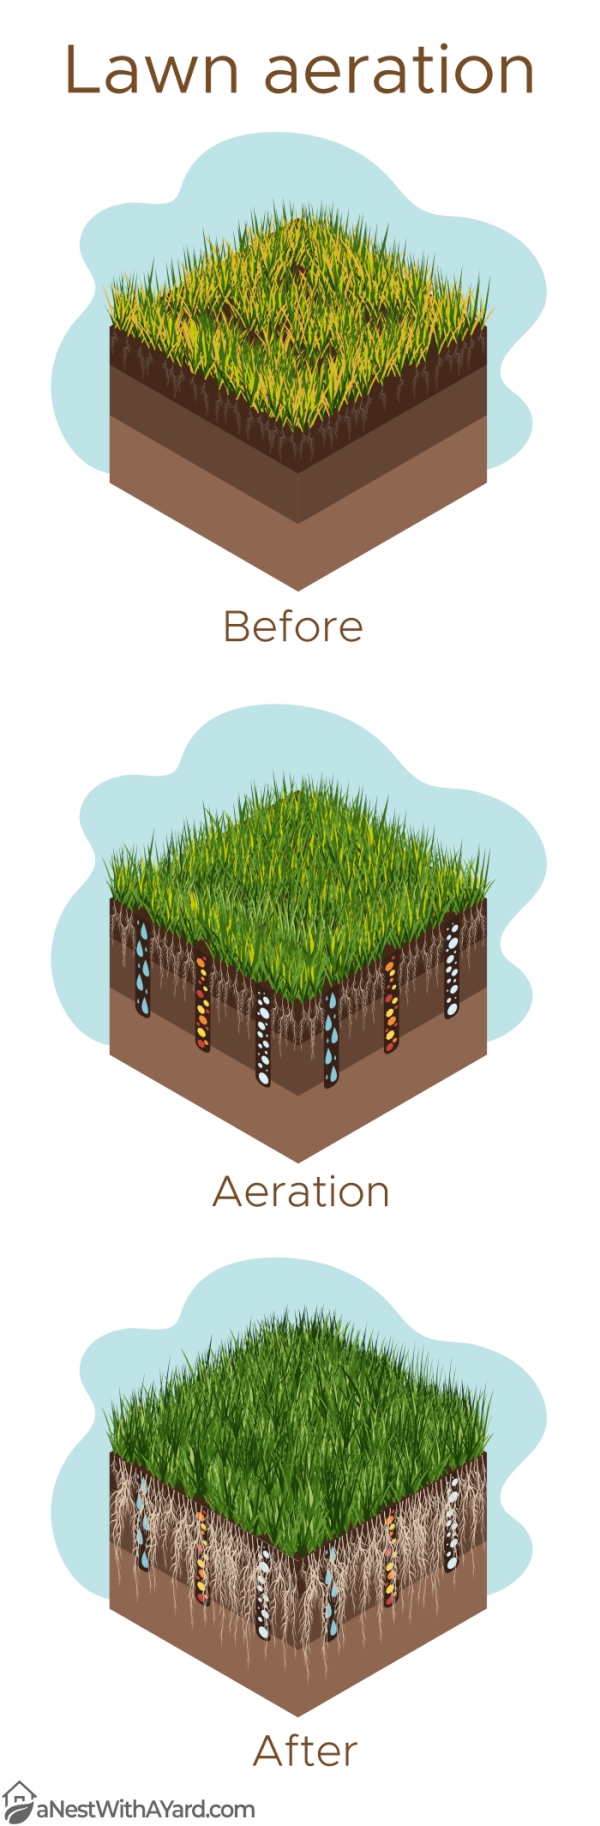 Infographic depicting lawn aeration